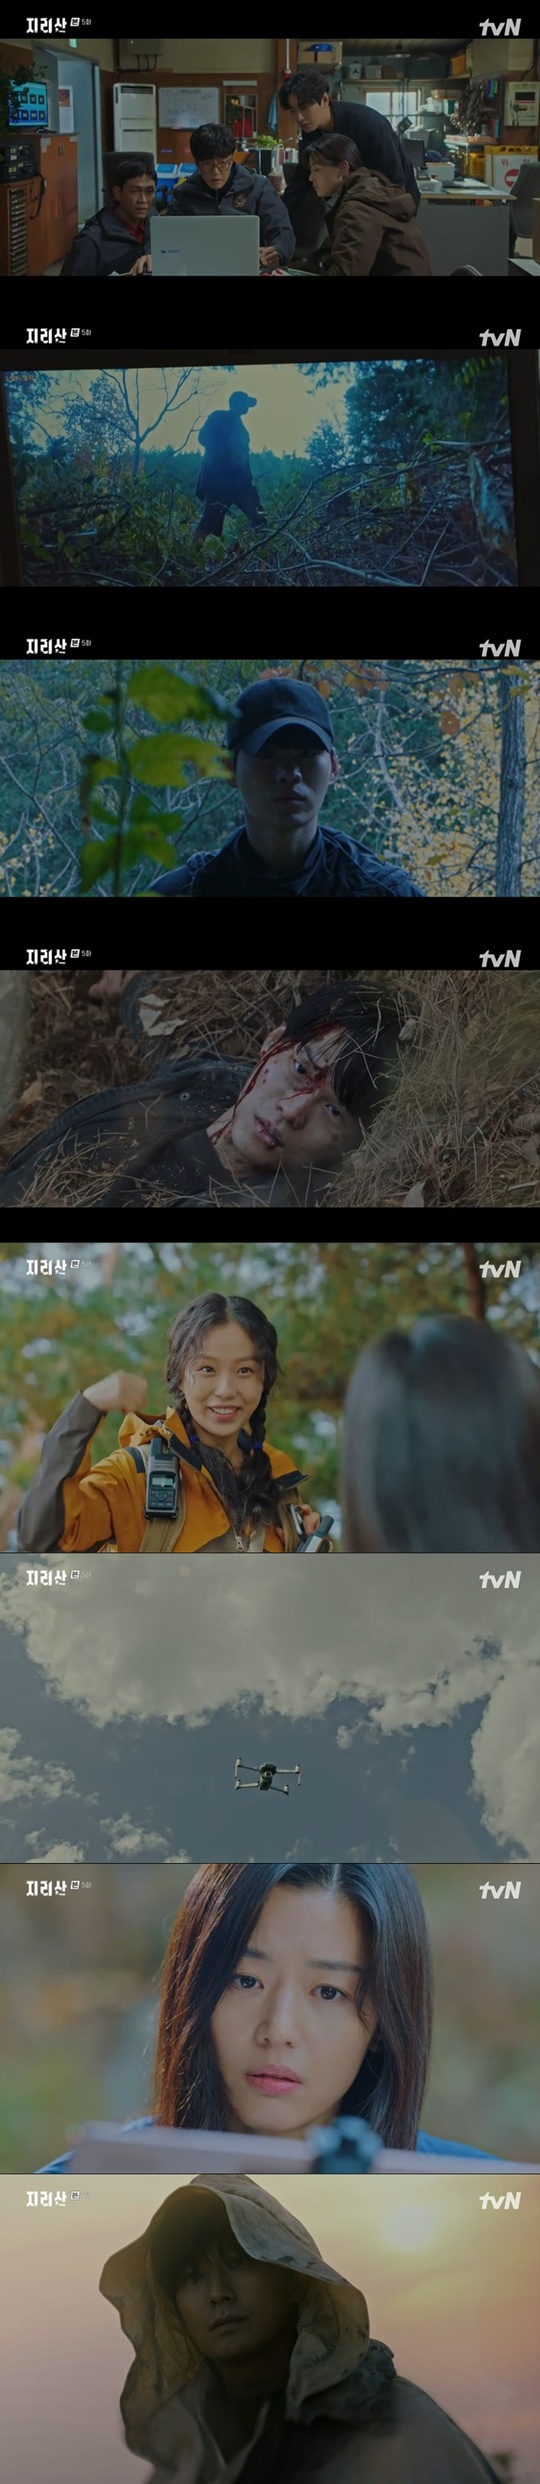 Potato bomb killer Yoon Ji-on was killed in 2018, and in 2020 Jun Ji-hyun flew a drone looking for Ju Ji-hoon.The 5th episode of TVNs Saturday Drama Jirisan (played by Kim Eun-hee/directed by Lee Eung-bok and Park So-hyun) broadcast on November 6 revealed the criminal in the potato bomb case.The Seoi River (Jun Ji-hyun) found out that the man with the wound on the back of the hand of the potato bomb that Ju Ji-hoon saw in the illusion was Lee Se-ok (Yoon Ji-on).Lee Se-ok is a person who loses his father and lives in a relative Lee Yang-sun (Resident Kyung) house and makes beekeeping in the mountains.However, Seoigang did not fully believe the words of the gang hyun and did not believe that Lee Se-ok was a potato bomb.In the meantime, the ship disappeared, and the Seoi River and the gang hyun found the ship in the mountains. The ship found a potato bomb alone and shed tears and said, I wanted to believe my grandfather.The potato bomb was found in the hatch of the grandfather of the grandfather. Lee heard Lee Se-oks words and found the hatch of the grandfather.However, gang hyun was convinced that Lee Se-ok was the perpetrator when he saw the wound on his hand, and Seo-gang advised Lee Yang-sun to go to the police.Lee Yang-suns grandfather was arrested by the police, but Gang hunjo visited Lee Se-ok and recognized the black T-shirt with white stains that Ahn Il-byeong said.gang hyun visited Anil Byeong and showed him a picture of Lee Se-ok, and Anil Byeong said that Lee Se-ok was the one who gave him the poisonous yogurt.gang hyun searched all the unmanned cameras to reveal that Lee Se-ok was the criminal, and soon found a screen of Lee Se-ok carrying a potato bomb by searching the unmanned cameras together with the Sheer River, the Jeong Gu-young (Oh Jeong-se-min), and Park Il-hae (Jo Han-cheol).They contacted the police, and Seoi River noticed that Lee Se-ok had deliberately told his grandfathers story about Lee Yang-sun.In the meantime, Lee Se-ok exchanged text messages with the person behind him and proceeded with the original plan as he instructed.As the Seoi River guessed, Lee Se-ok tried to kill the transfer ship with a potato bomb and changed the method to poisonous yogurt.Lee Se-ok handed over yogurt to comfort the transfer ship, and the transfer ship fell down on yogurt.But soon the Seoi River, Gang hunjo, and Jeong Gu-young were taken to the hospital where they found the fallen ship.The Seoi River and the gang hyun felt popular and chased Lee Se-ok, who fled to the mountain.The Seoi River apologized to gang hyun, saying, You were right. You saved your life.In the meantime, Lee Se-ok, who fled to the mountain, was found dead, and around him, Cho Dae-jin (Sung Dong-il) was found to be Fade to Black and raised suspicion.